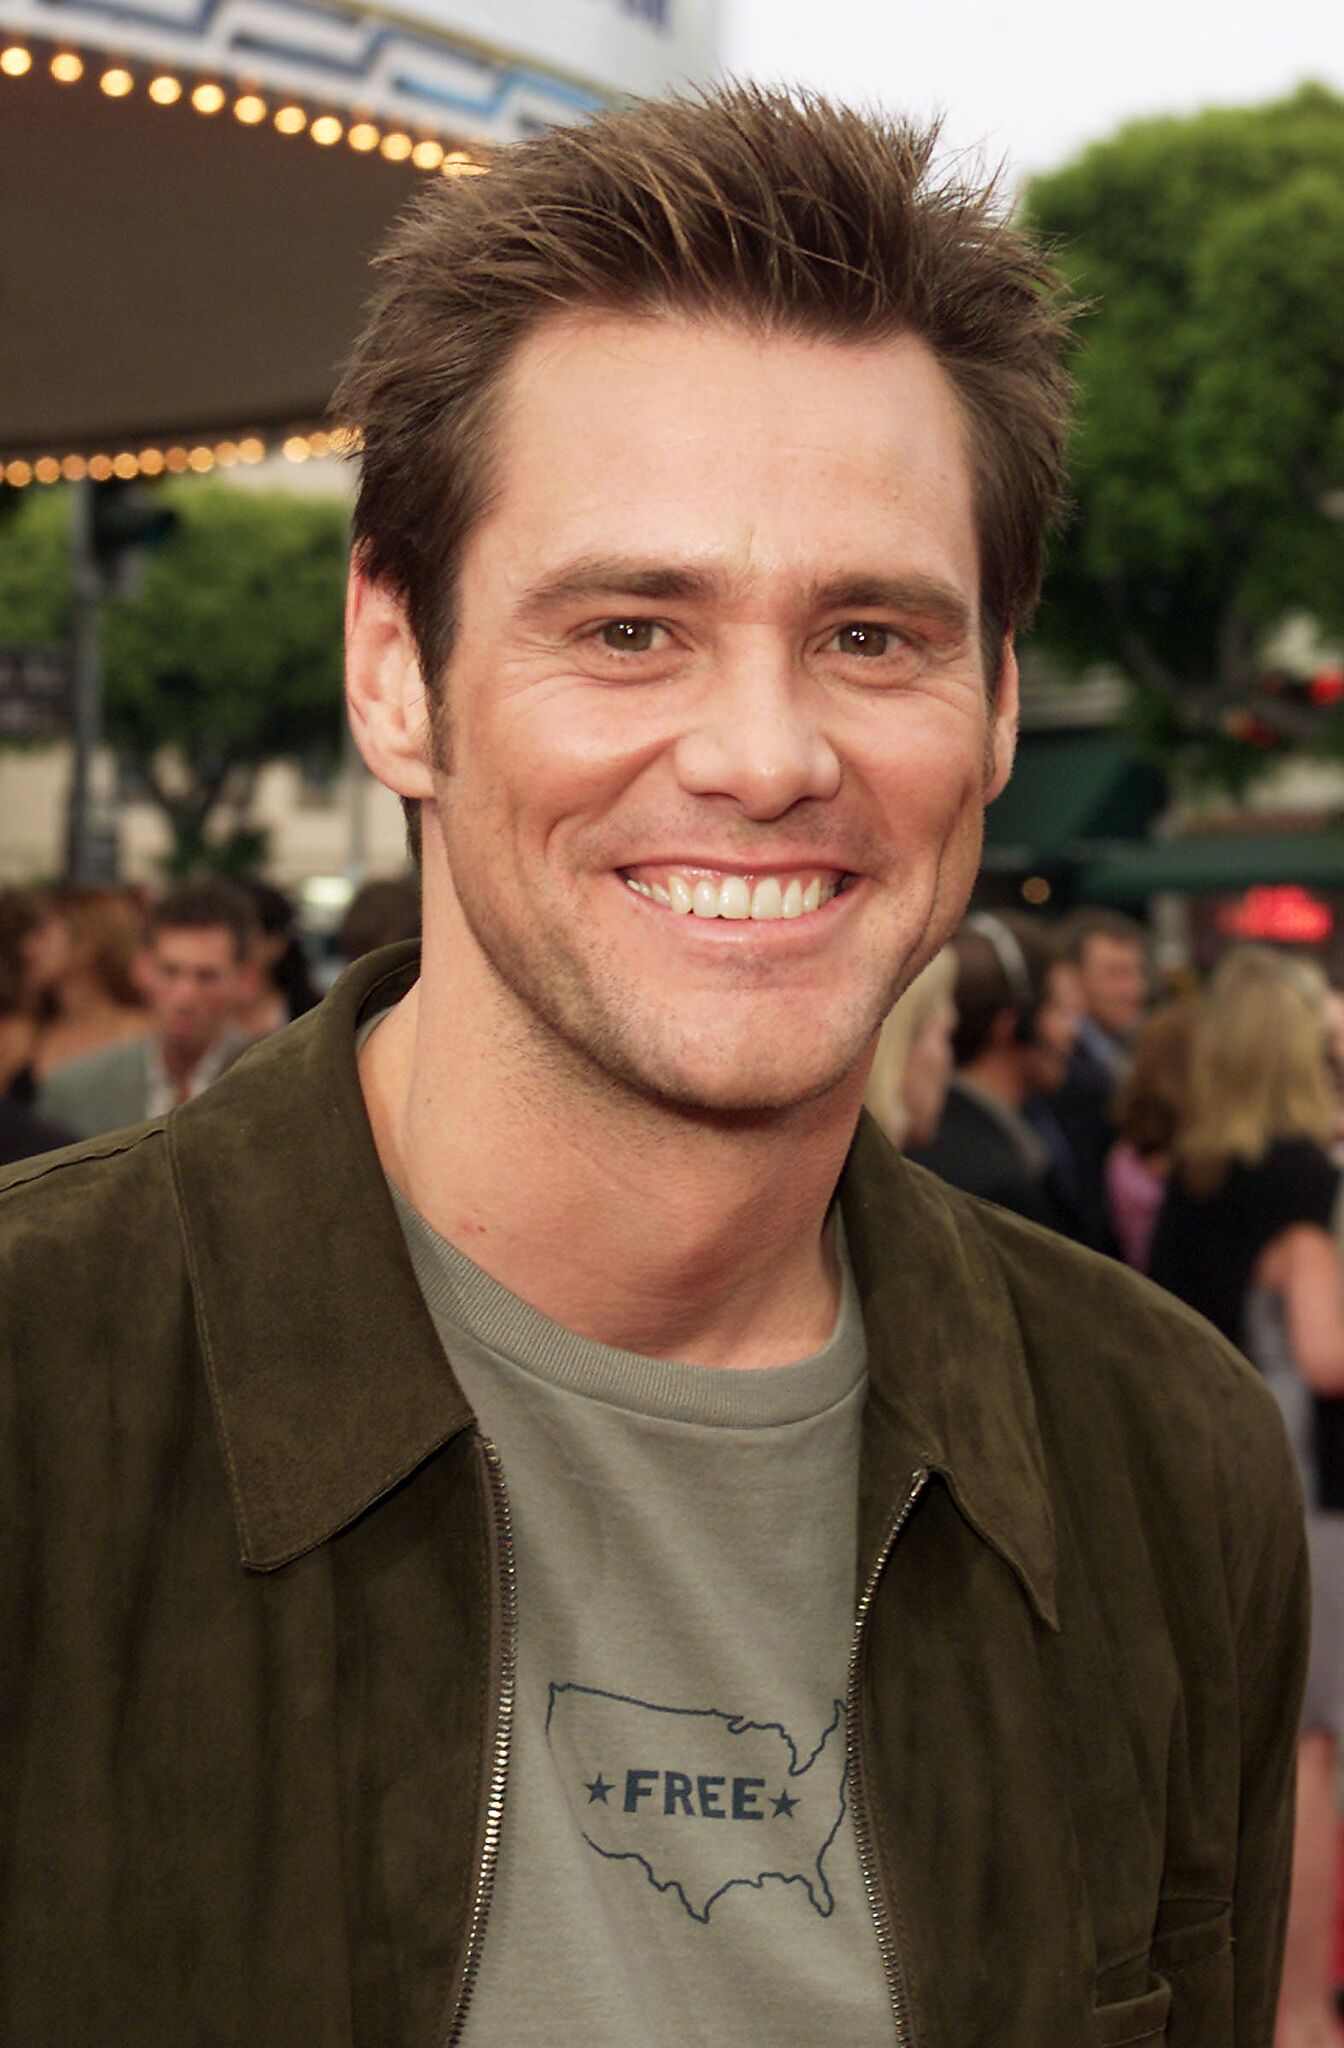 Jim Carrey at the premiere of 'Me, Myself & Irene' at the Village Theater in Westwood, California in 2002 | Photo: Getty Images